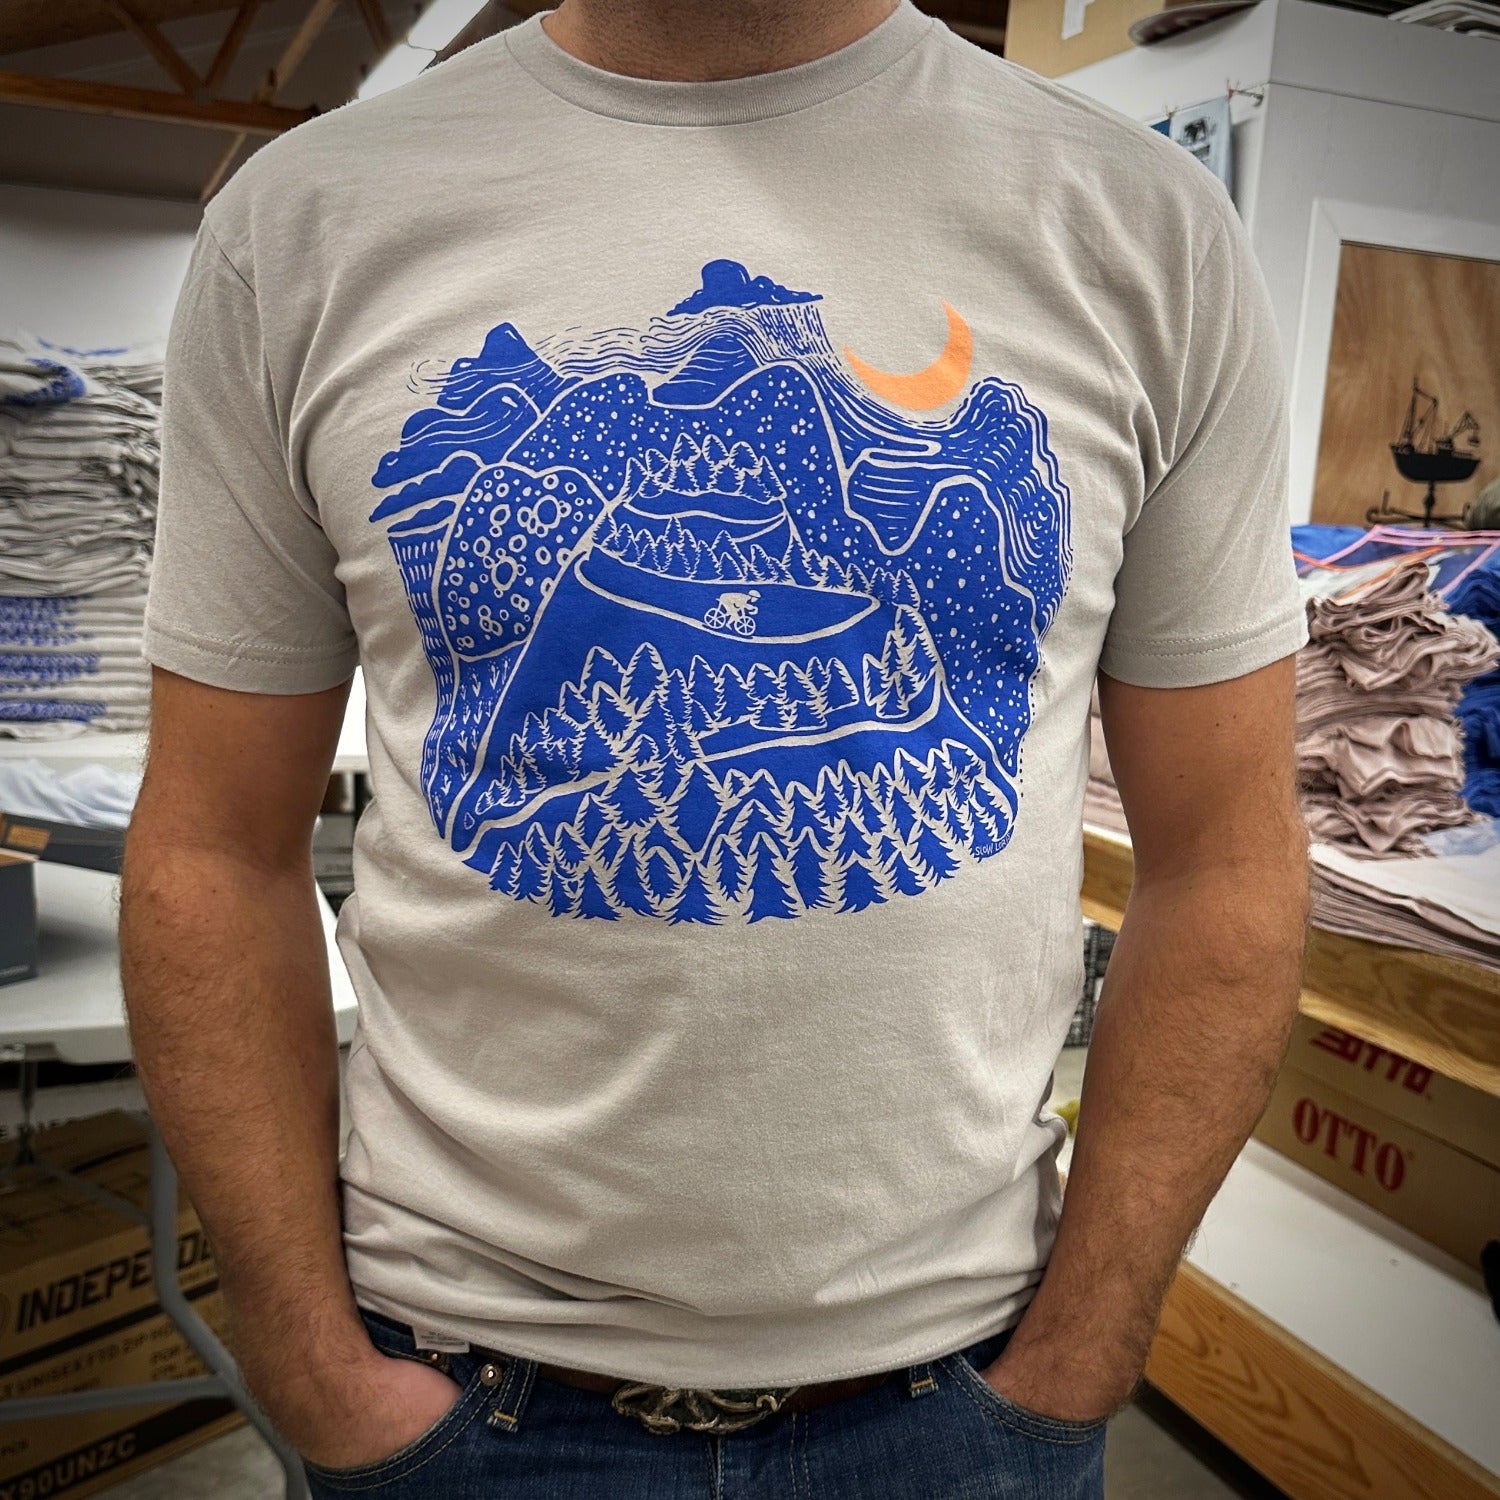 Night Ride print on tan shirt in dark blue ink. Mountain scene with raincloud, crescent moon, and bicyclist riding down the mountain